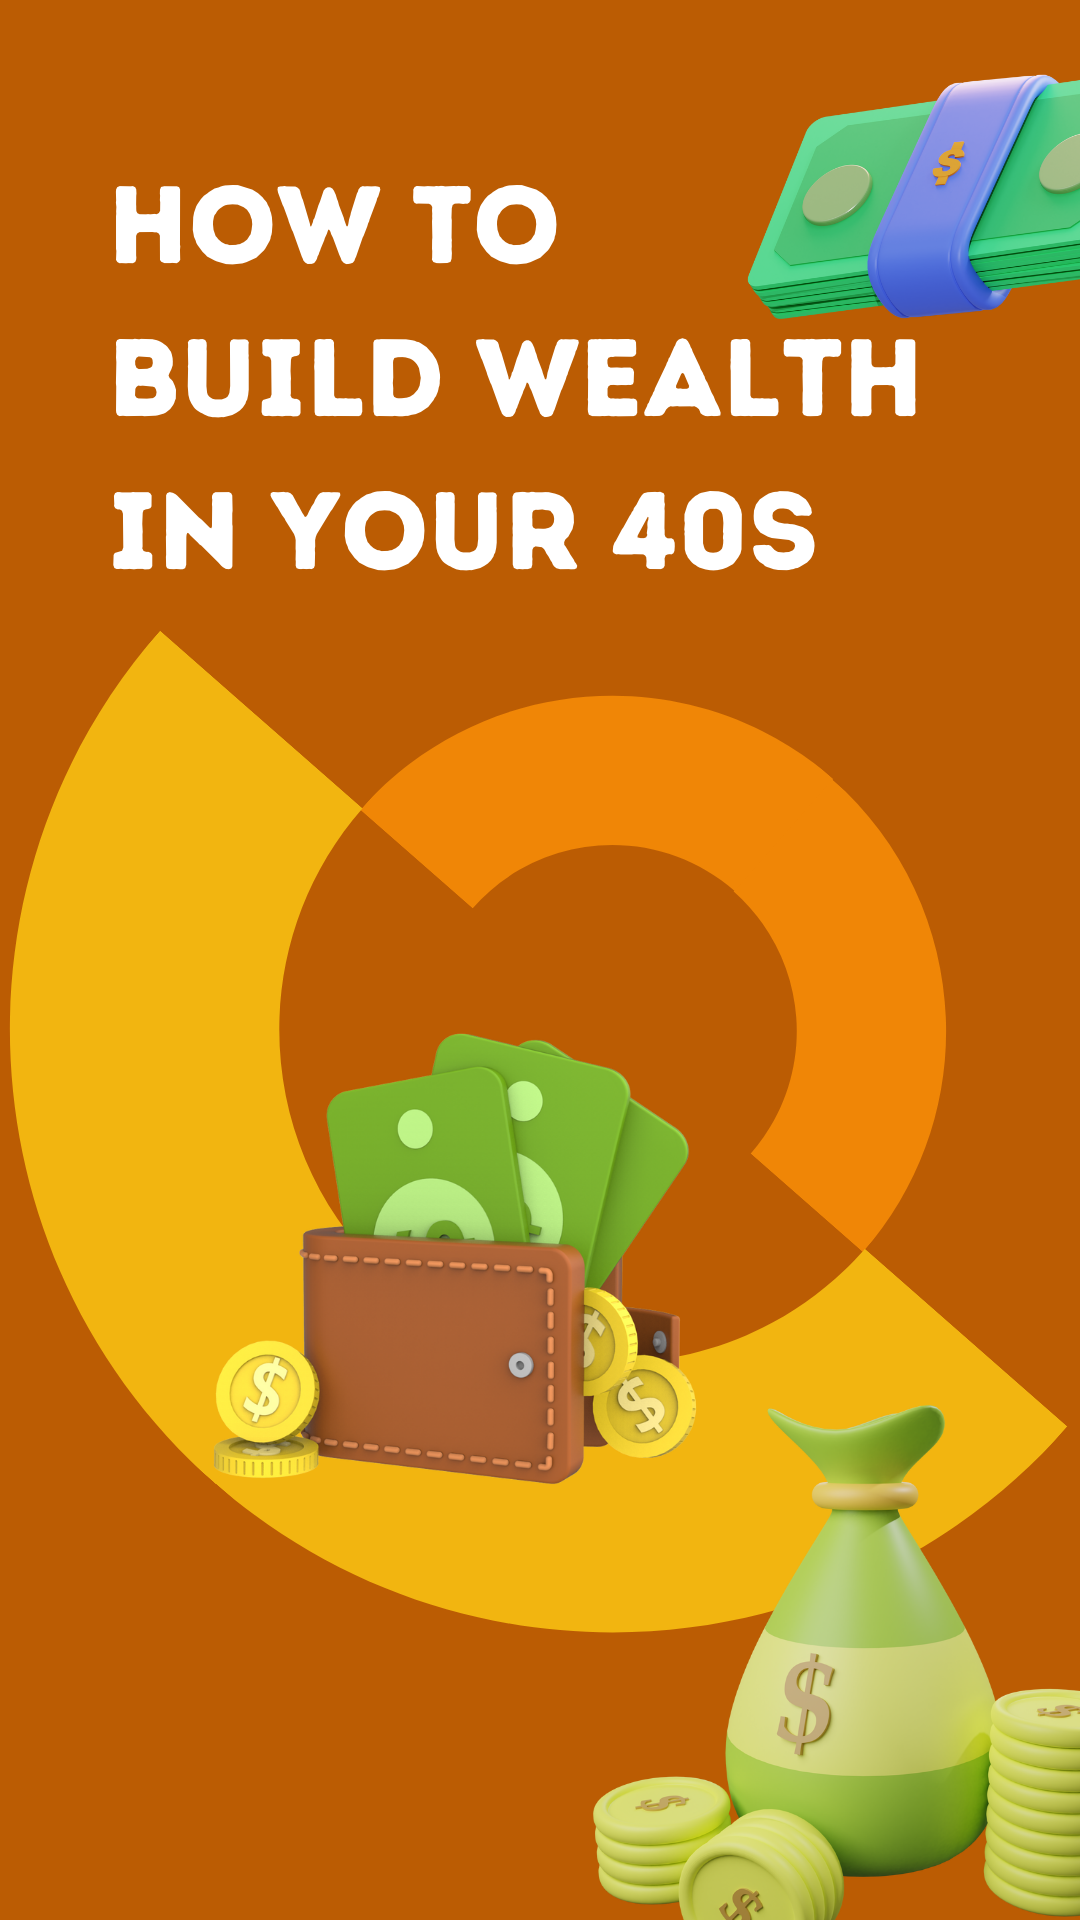 5 Ways on How to Build Wealth in Your 40s